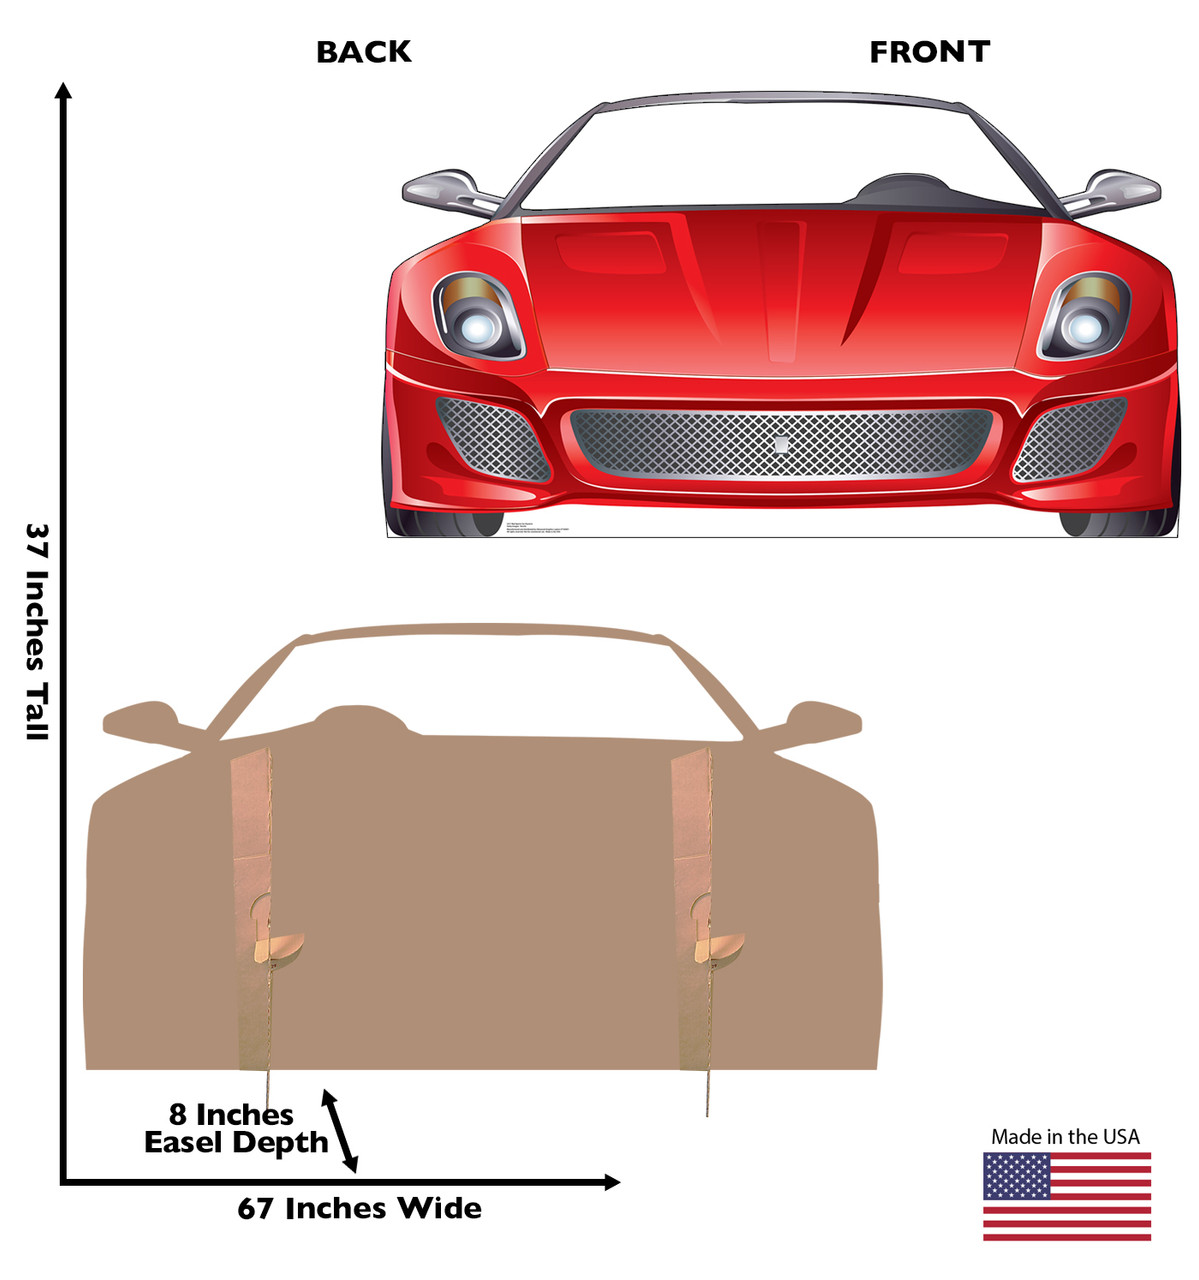 Life-size cardboard standee of a Red Sports Car Standin with back and front dimensions.